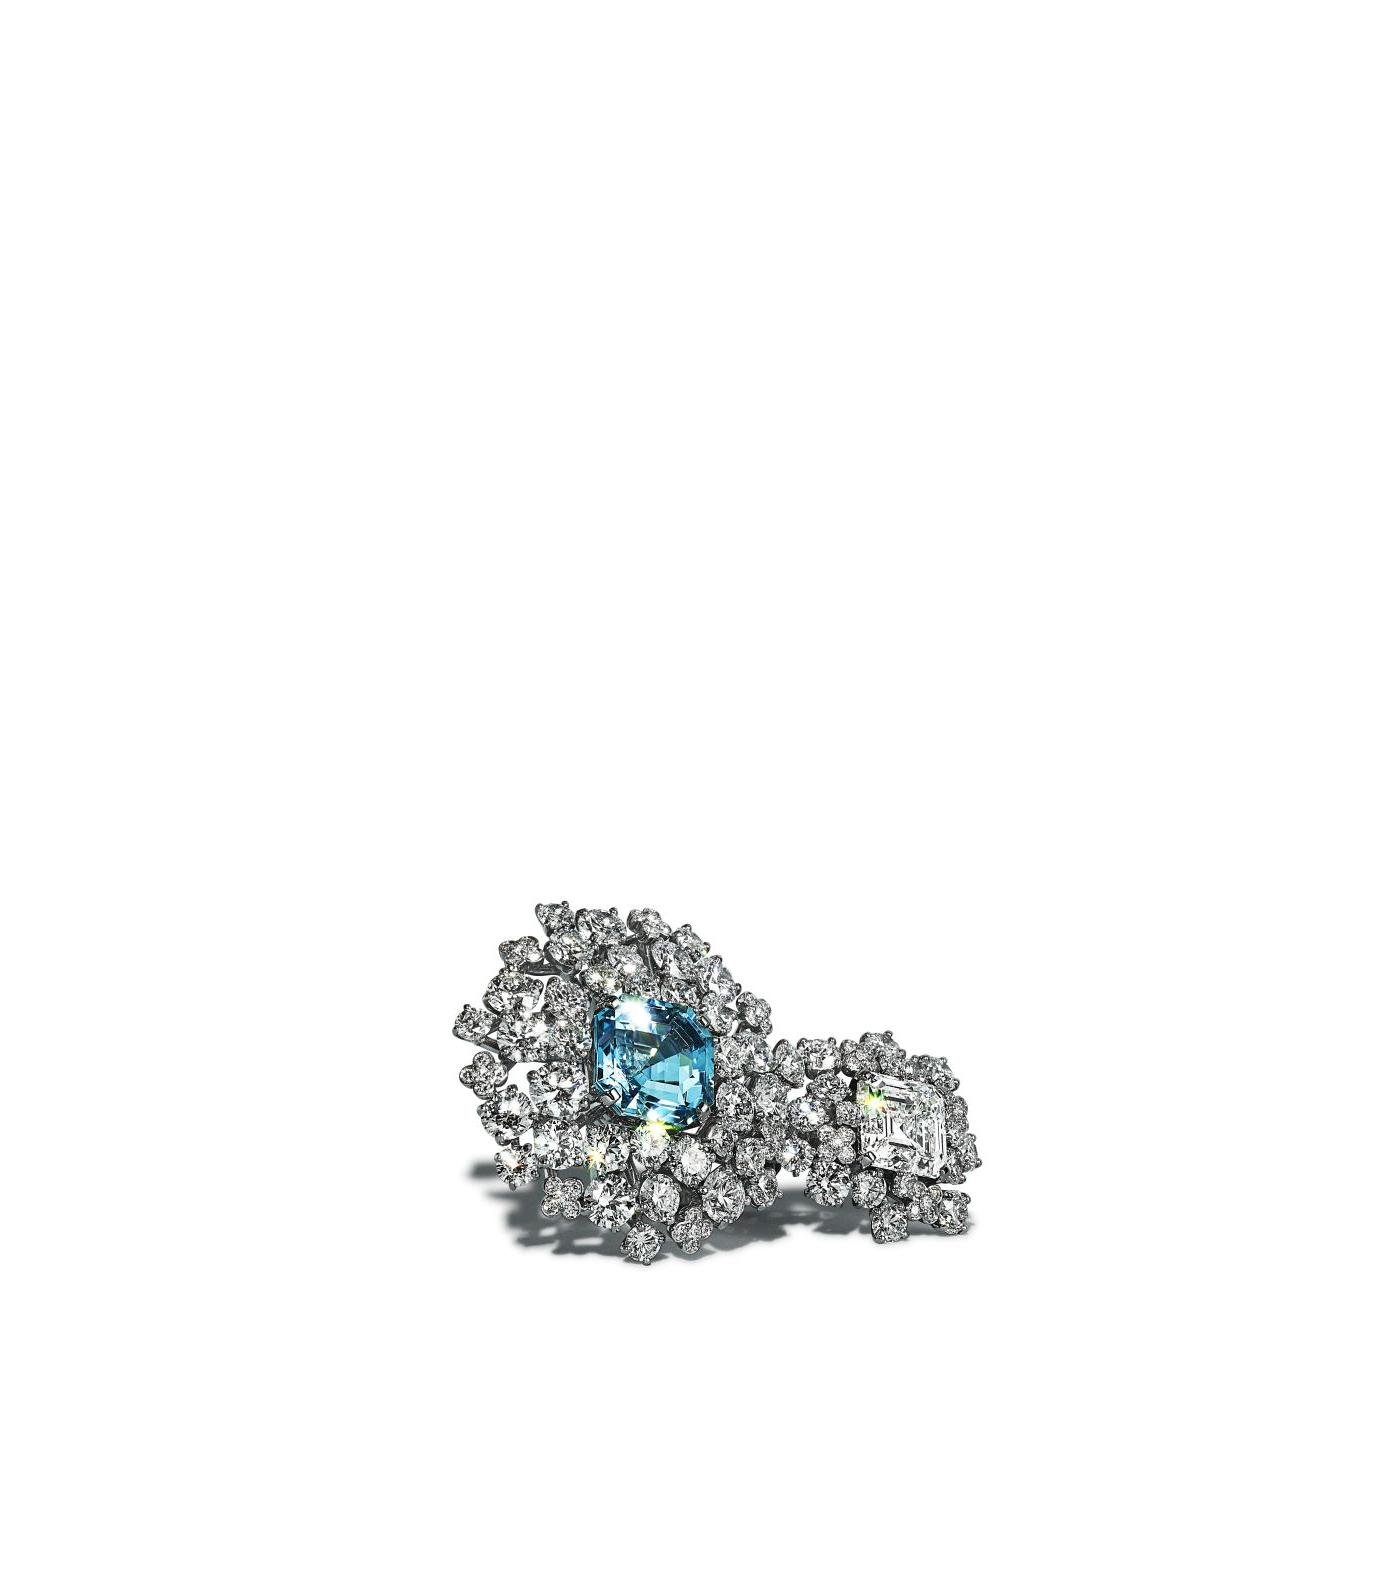 Ring by Tiffany & Co.